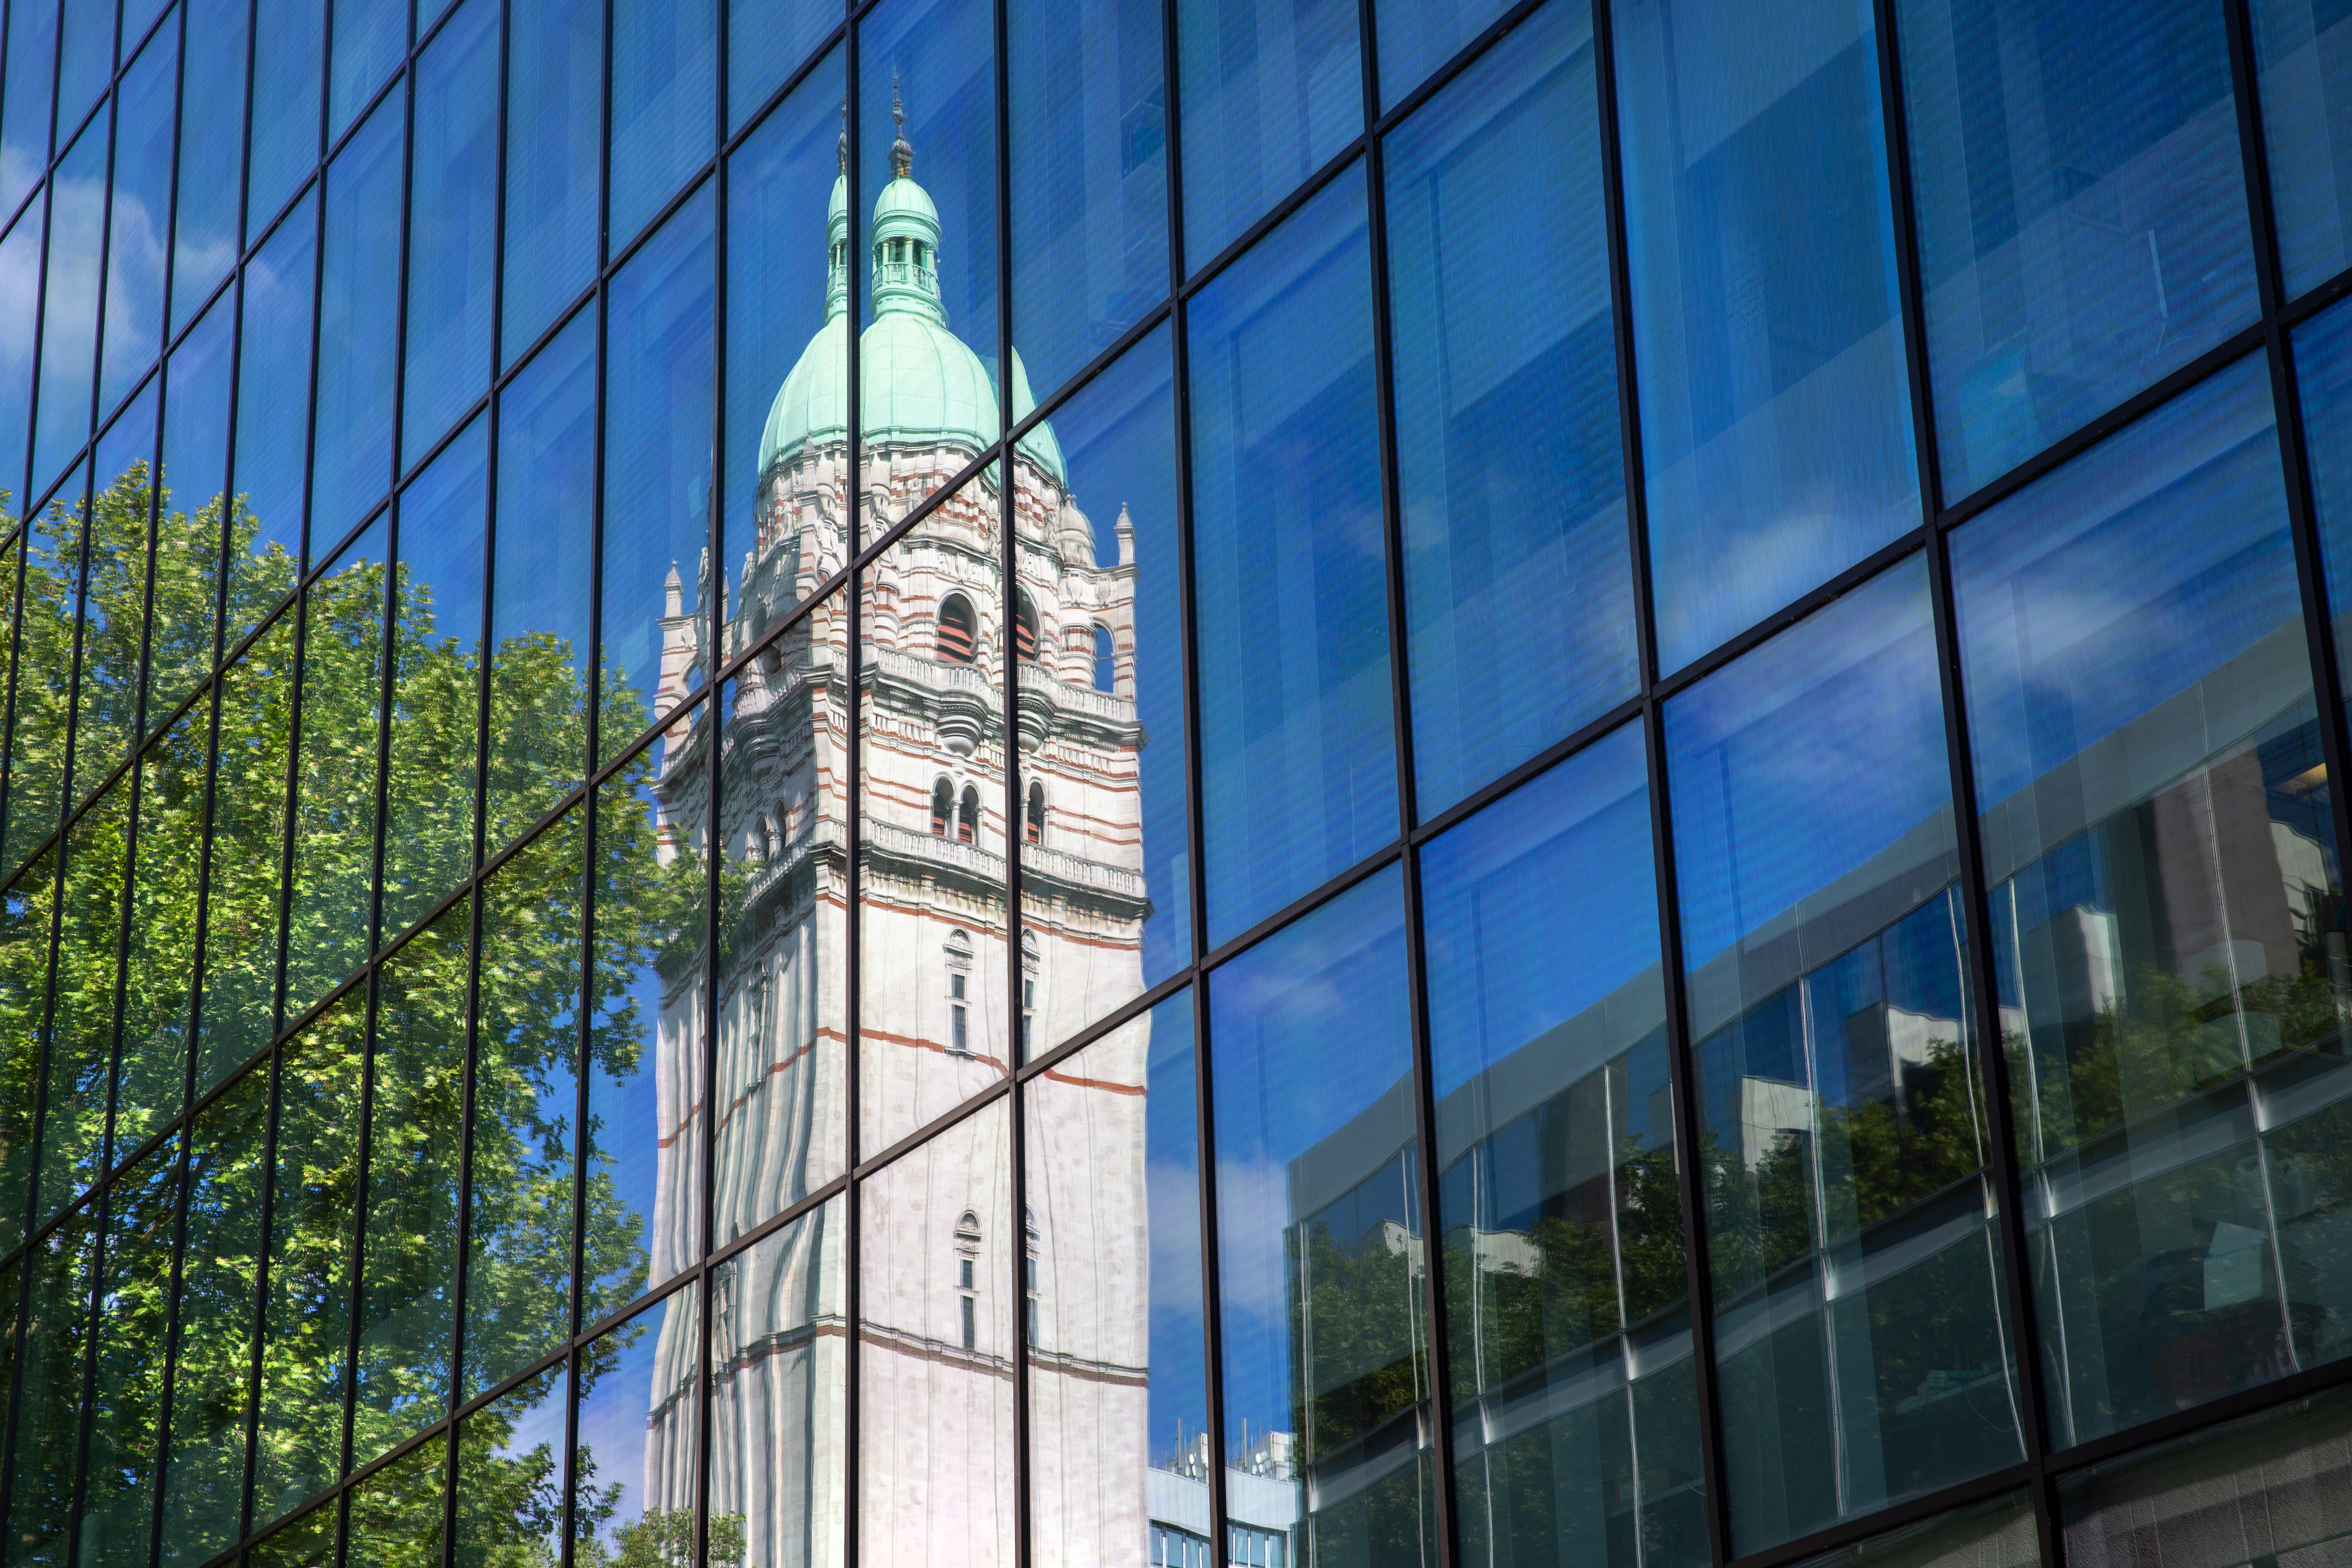 Imperial College London's tower reflected in a glass façade